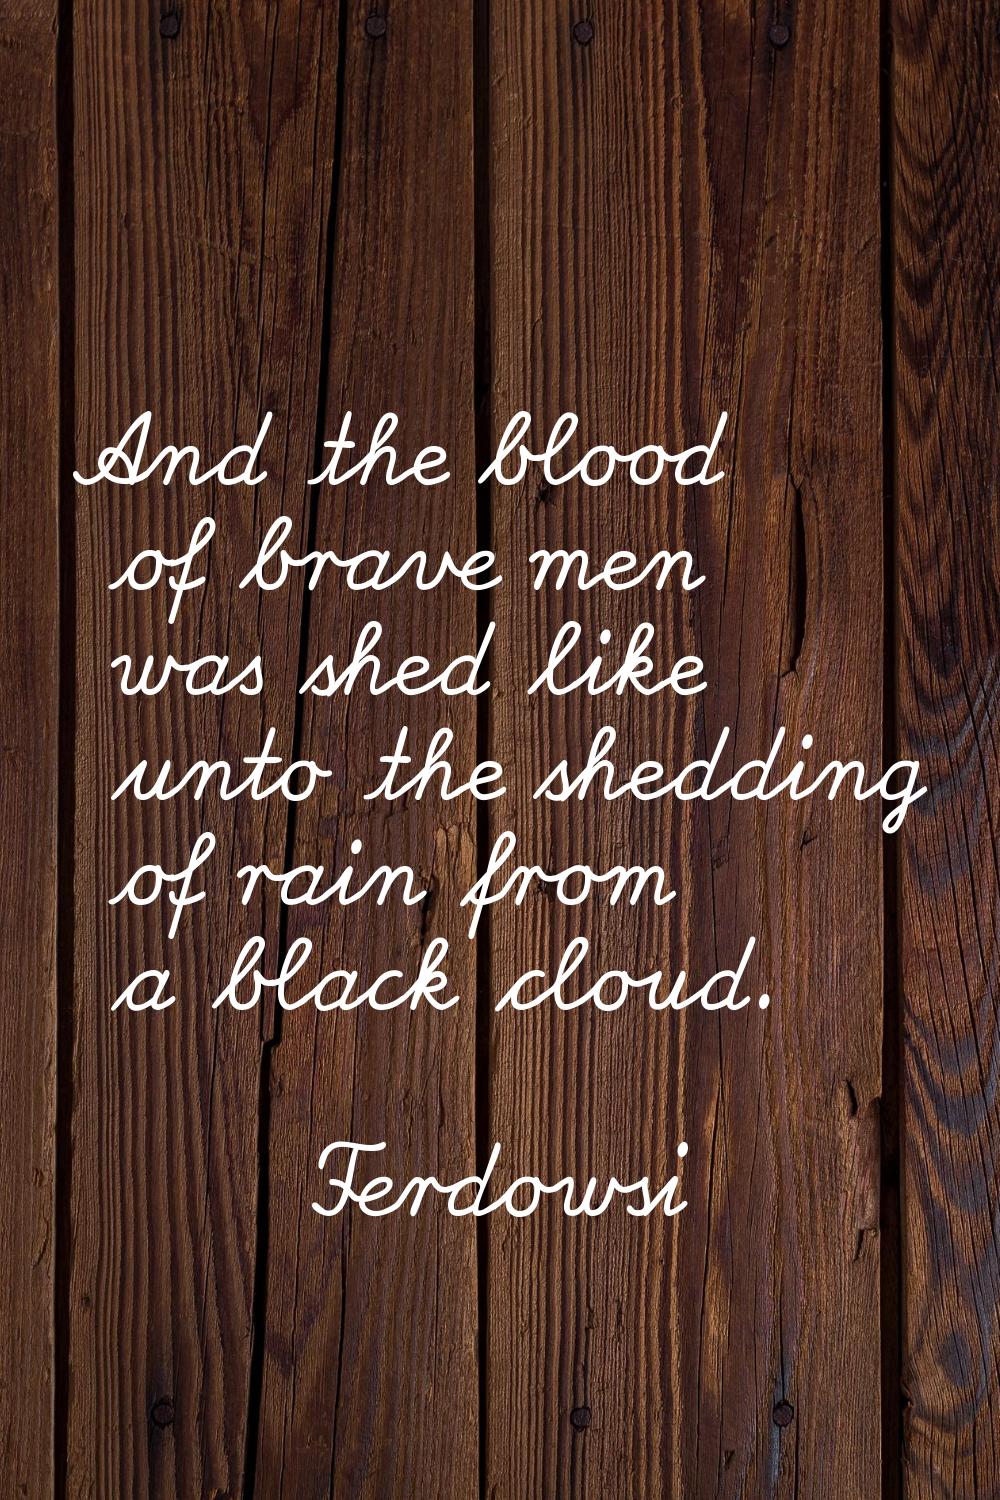 And the blood of brave men was shed like unto the shedding of rain from a black cloud.